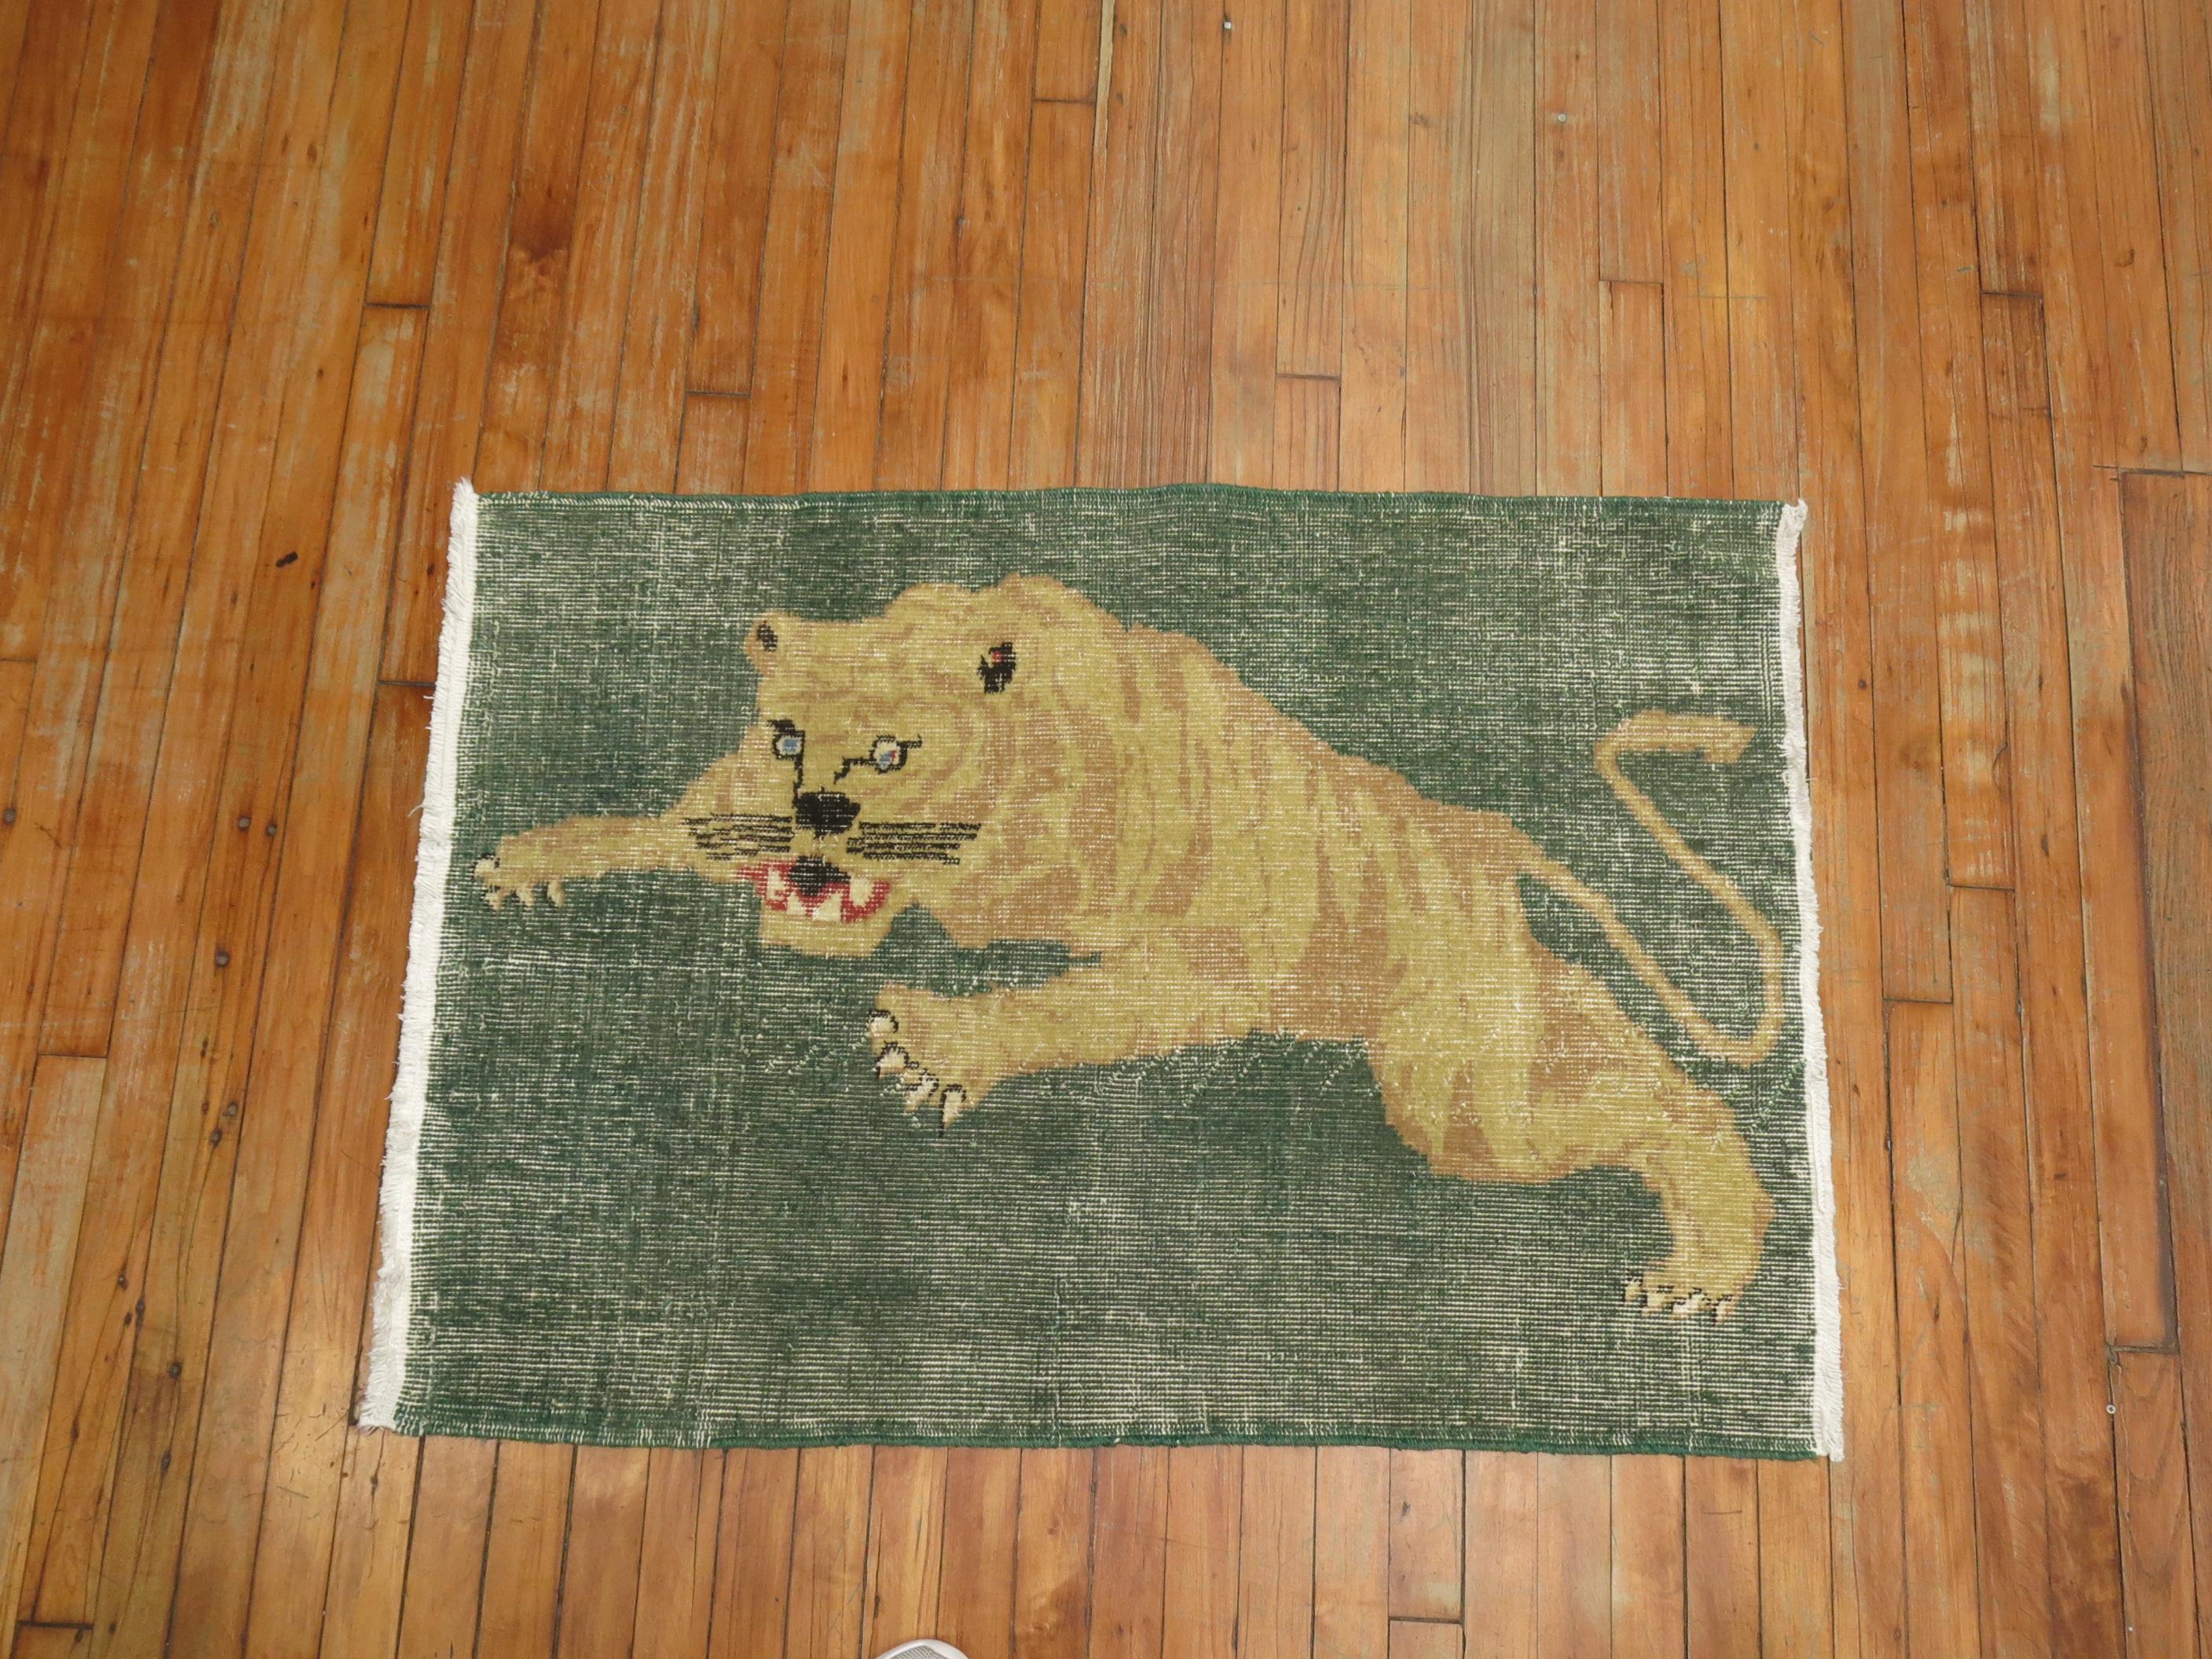 A late 20th century one of a kind shabby chic Turkish rug depicting a tiger roaring on a green field.

Measures: 31